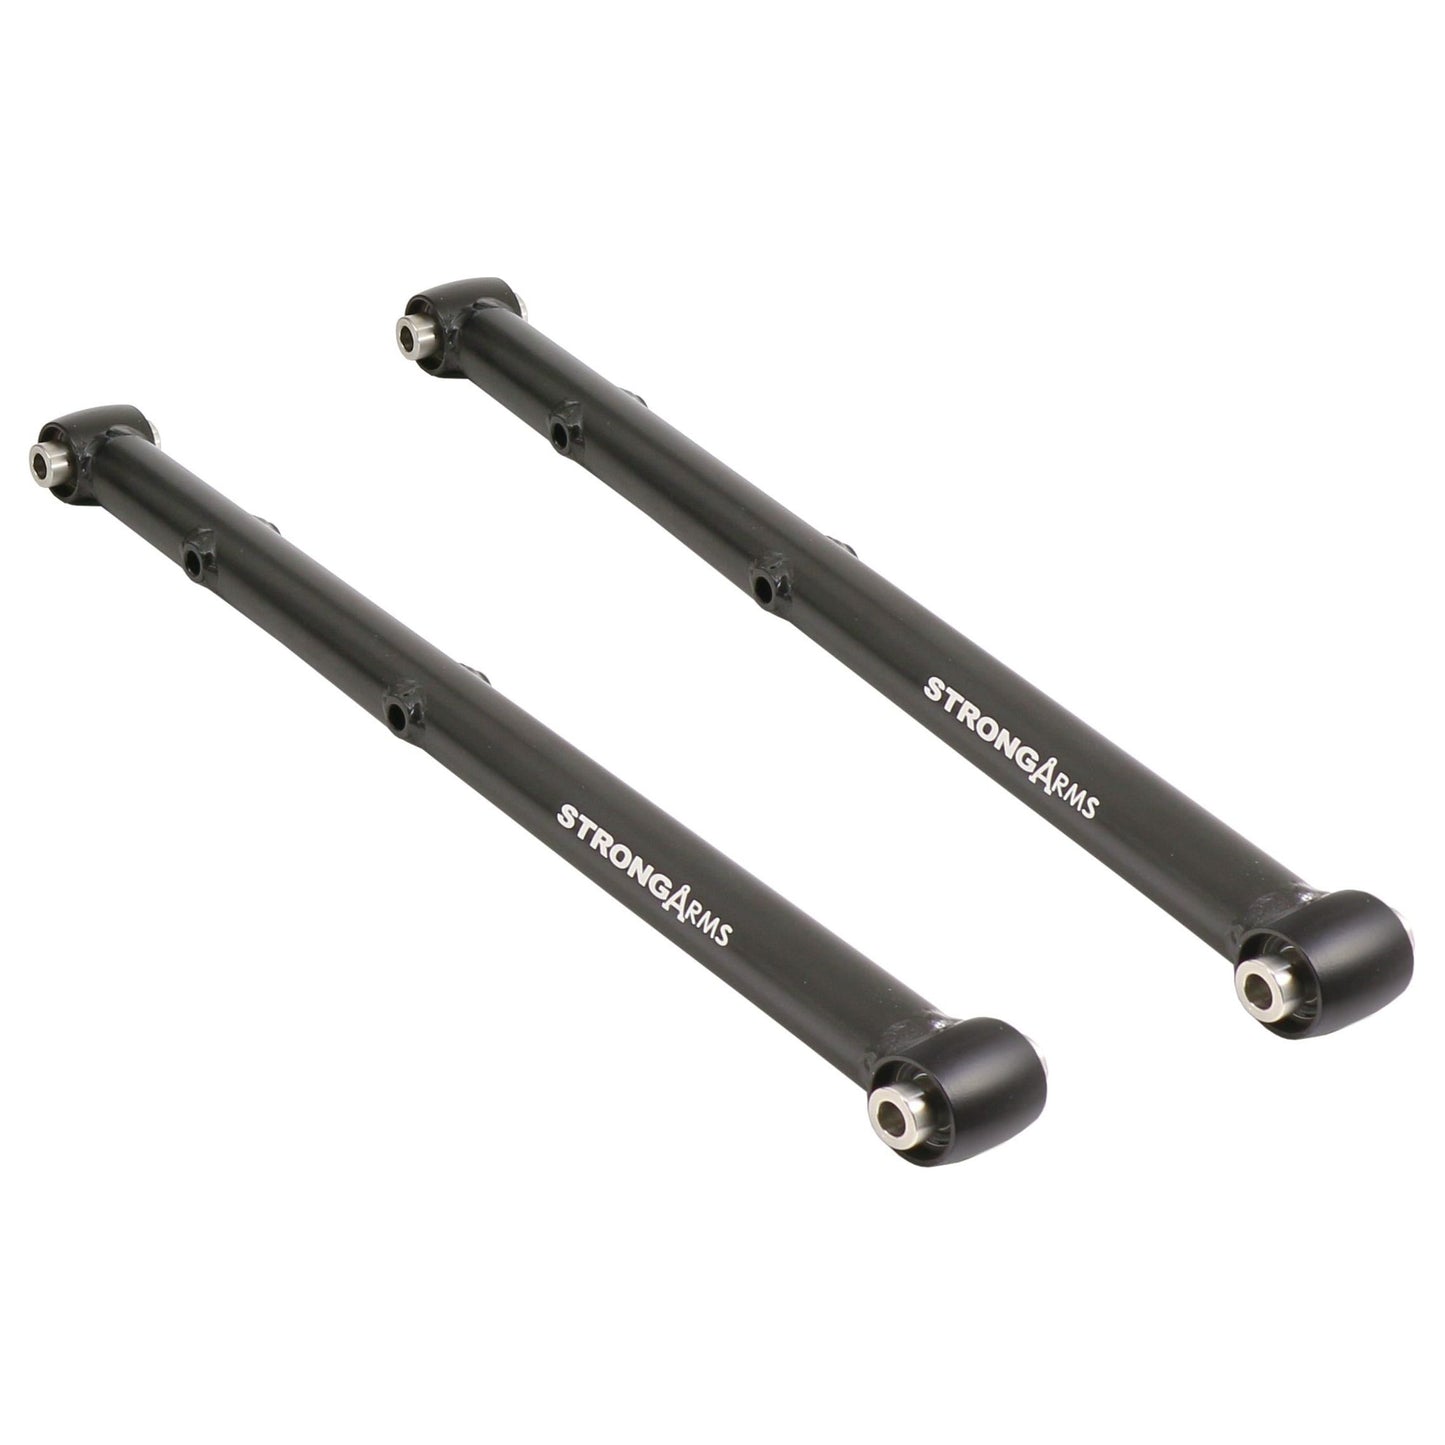 Rear Lower StrongArms for 1978-1988 GM G-Body